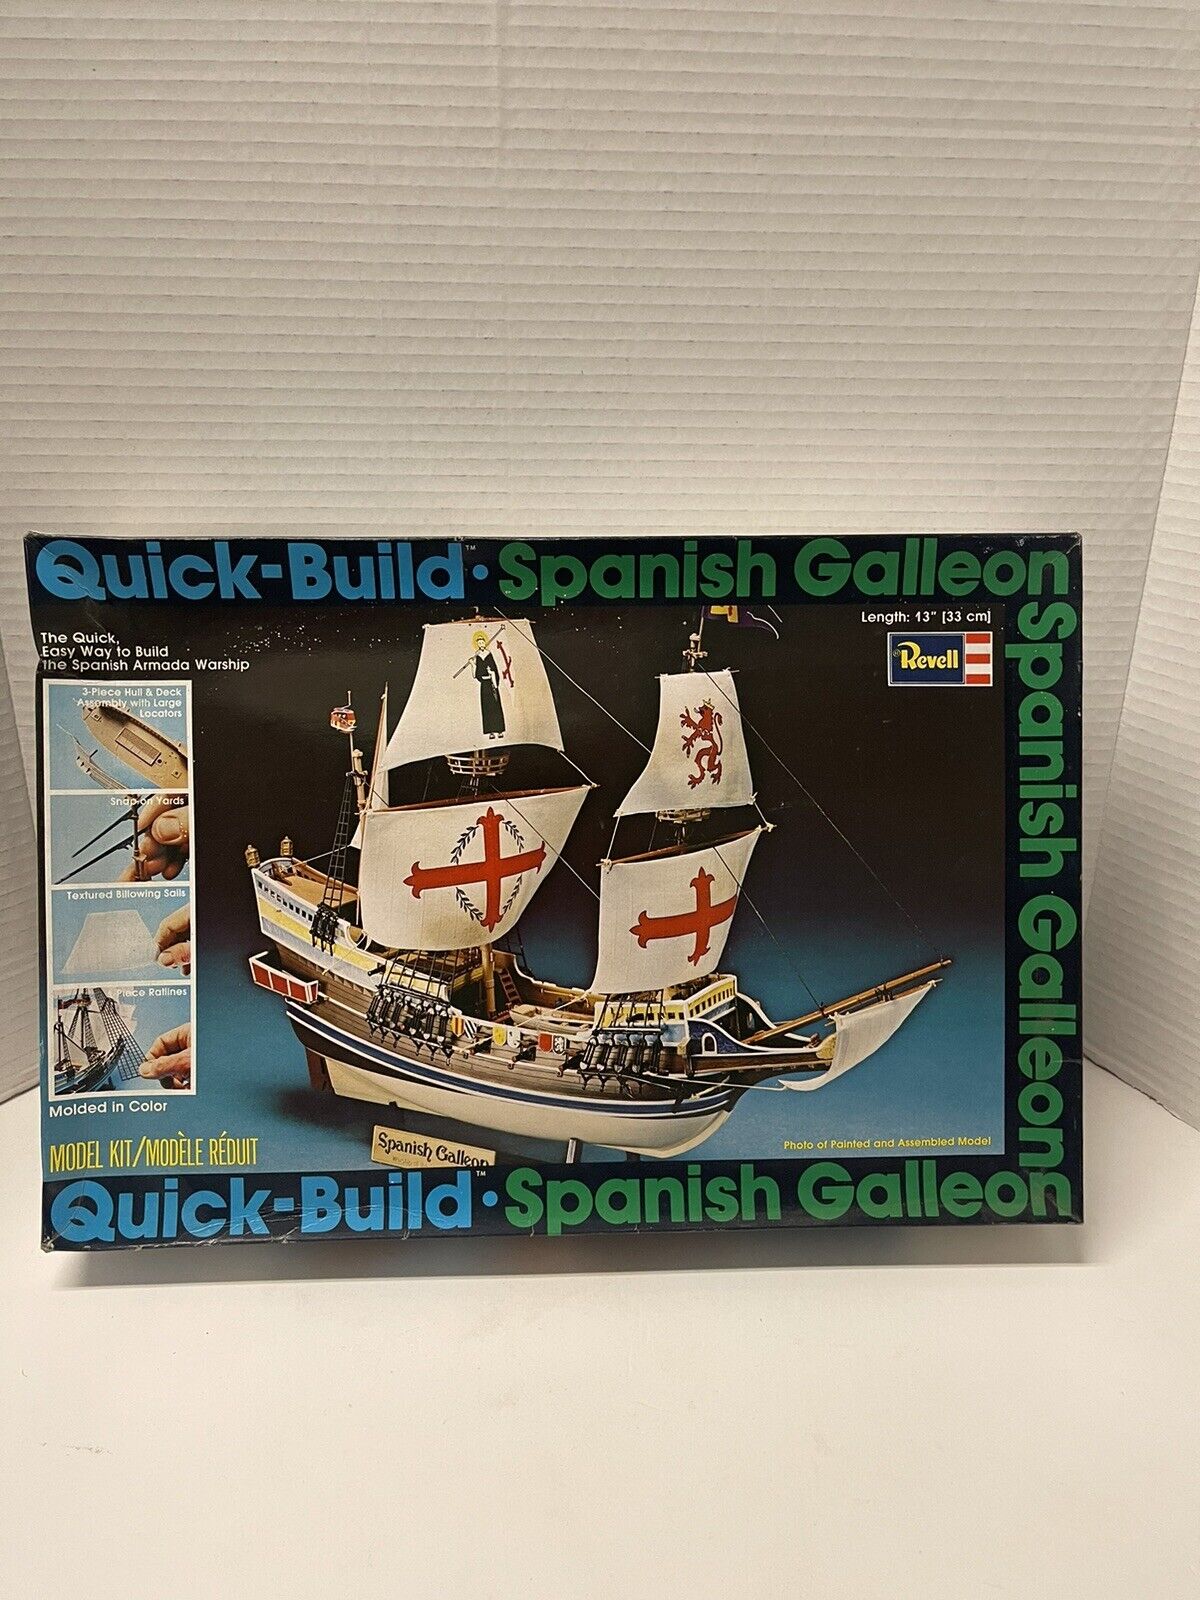 REVELL QUICK-BUILD SPANISH GALLEON MODEL KIT Complete In Box Vintage Rare